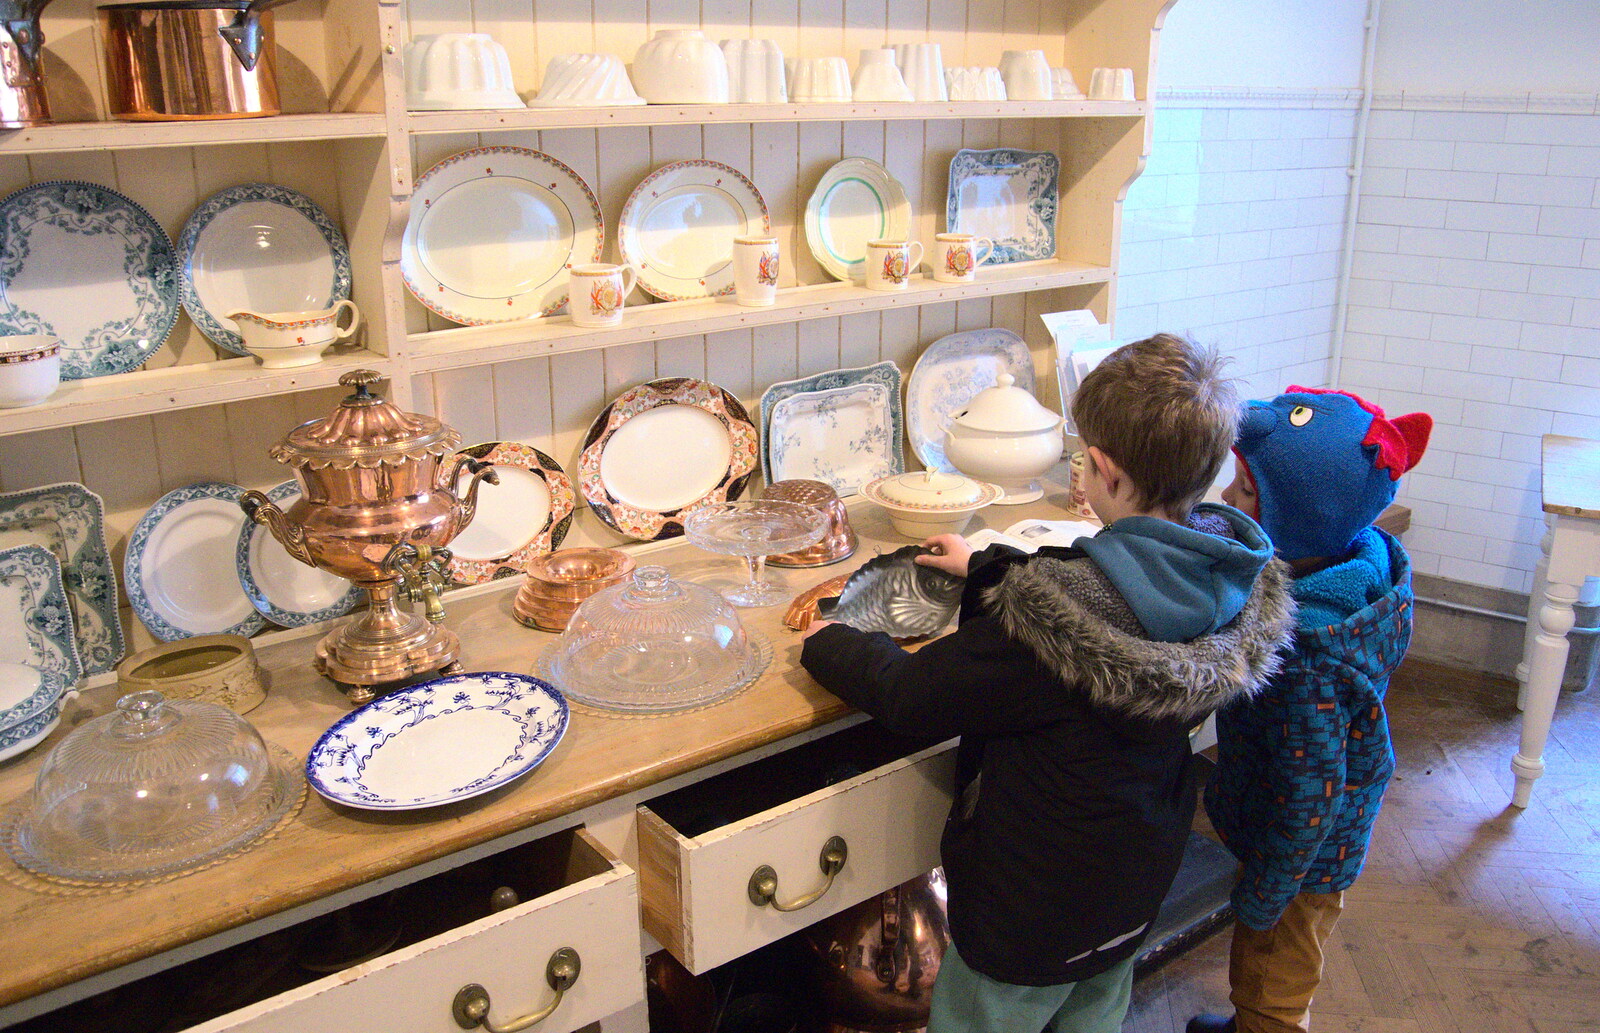 The boys investigate 1920s kitchen moulds from Life Below Stairs, Ickworth House, Horringer, Suffolk - 28th January 2018